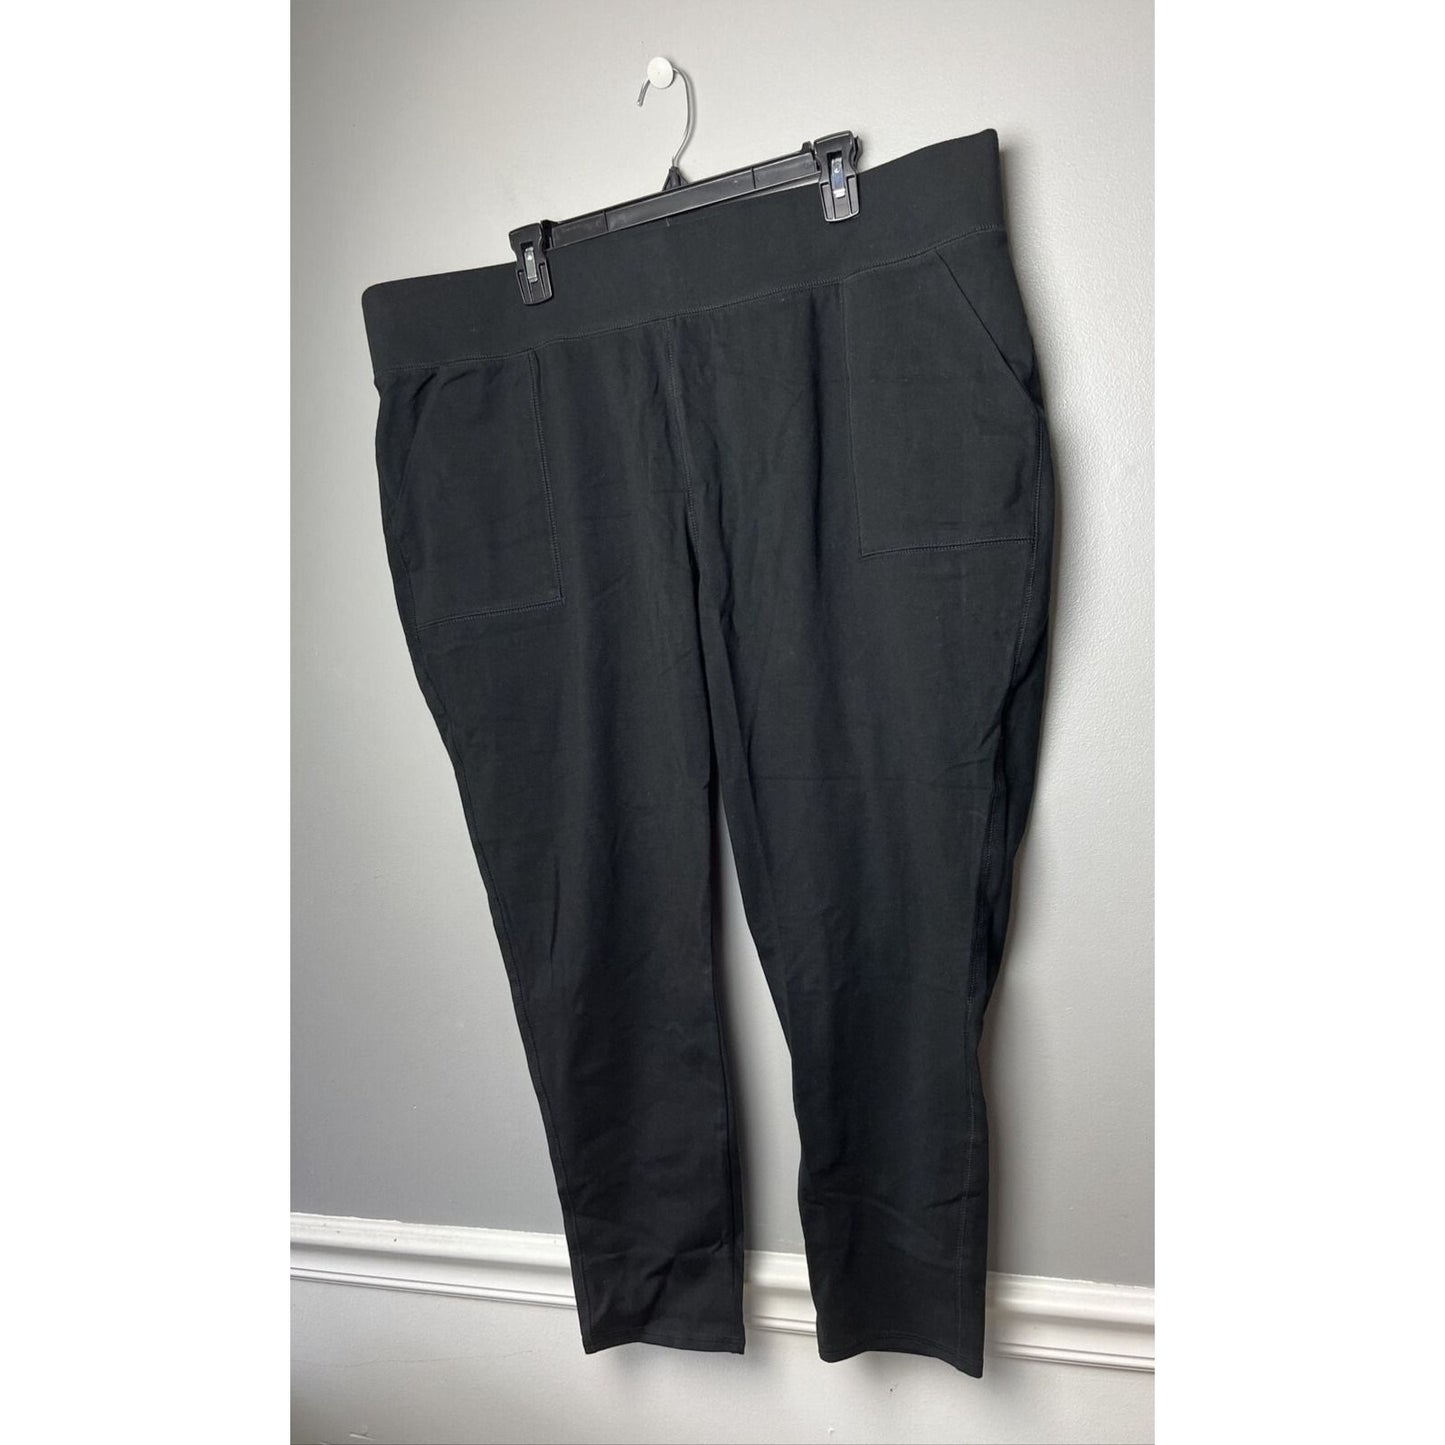 Denim & Co. Active Petite Duo Stretch Leggings with Wide Waistband A470145 ,2XP